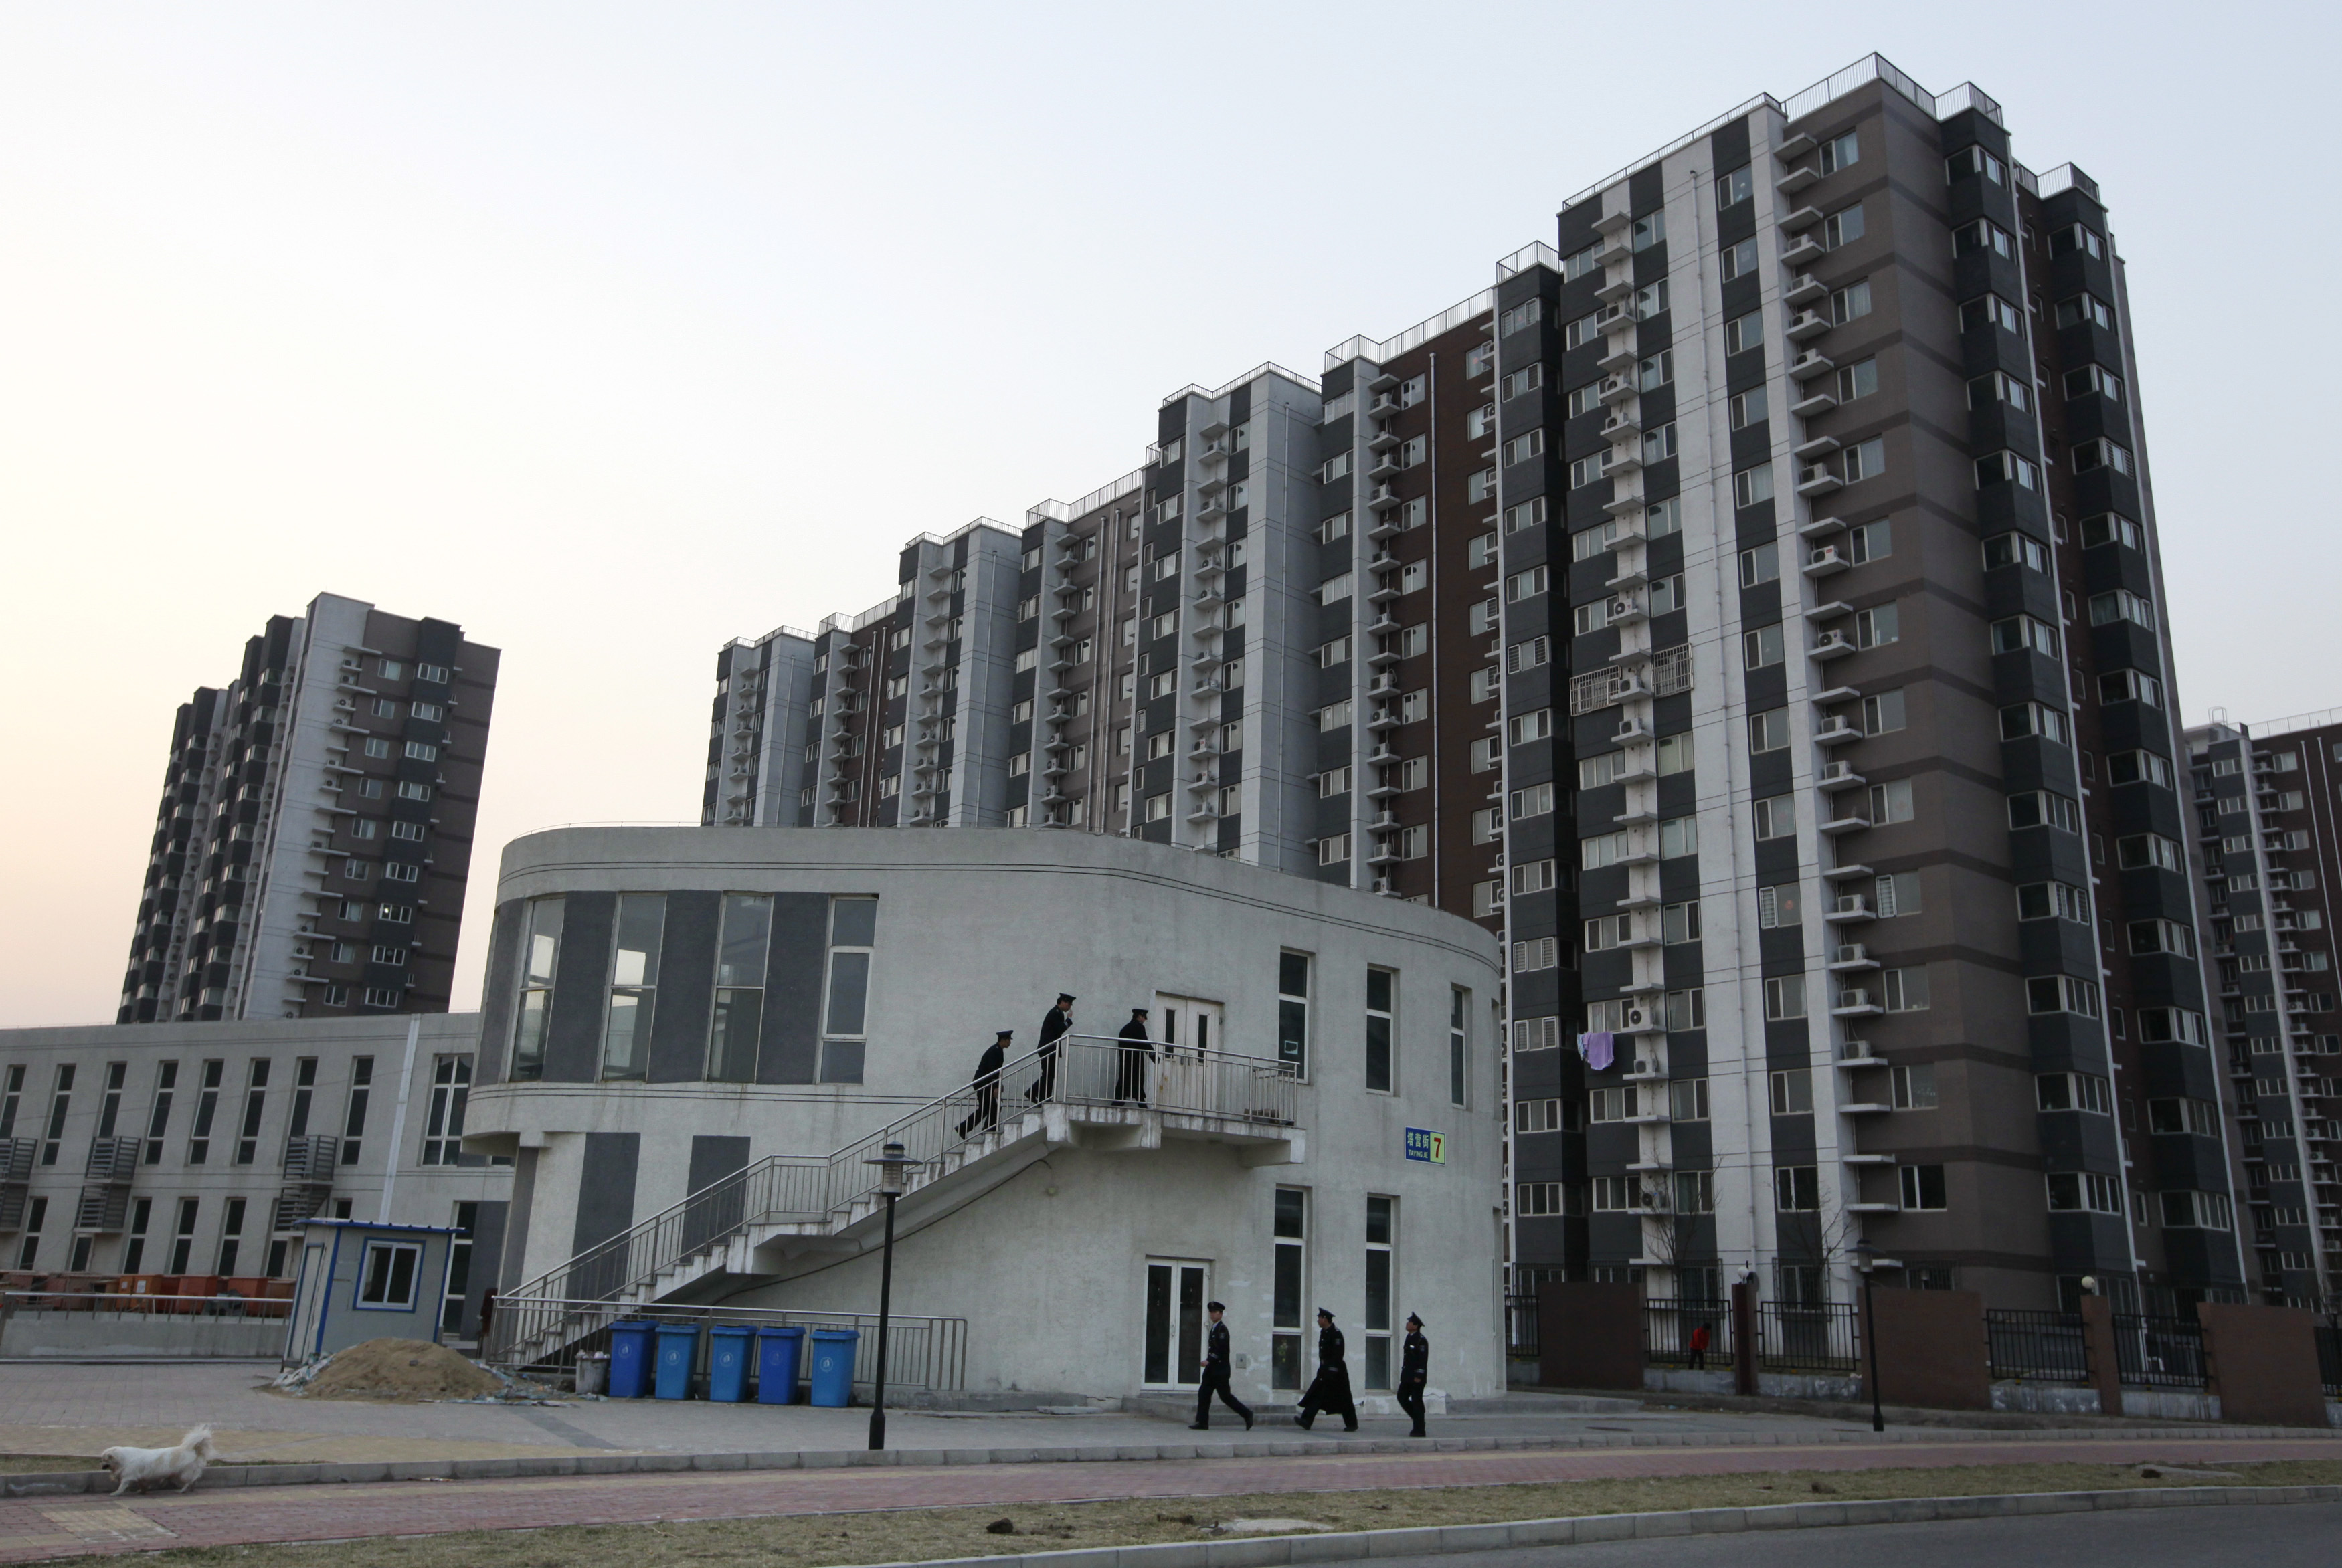 Security guards walk into a building in front of apartment blocks in Beijing